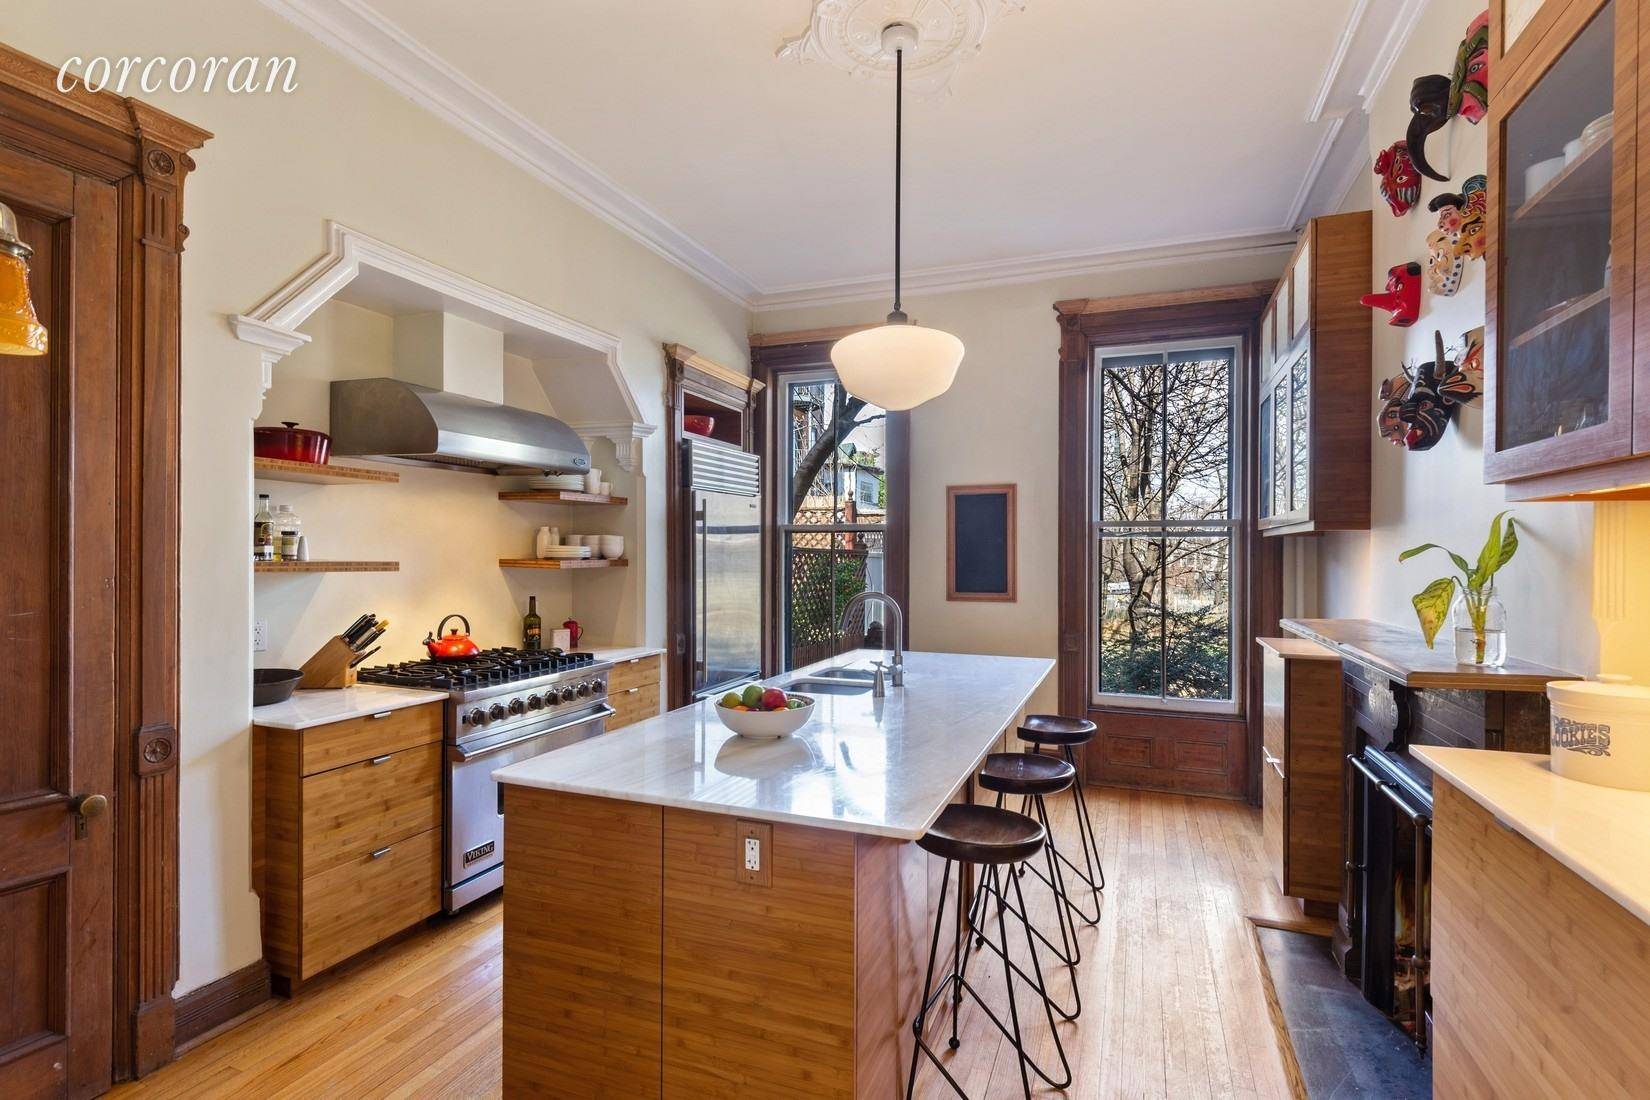 This beautifully designed, completely renovated and restored single family brick townhouse offers amazing space with five bedrooms, three baths, seven working wood burning fireplaces, a parlor complete with gorgeous original ...